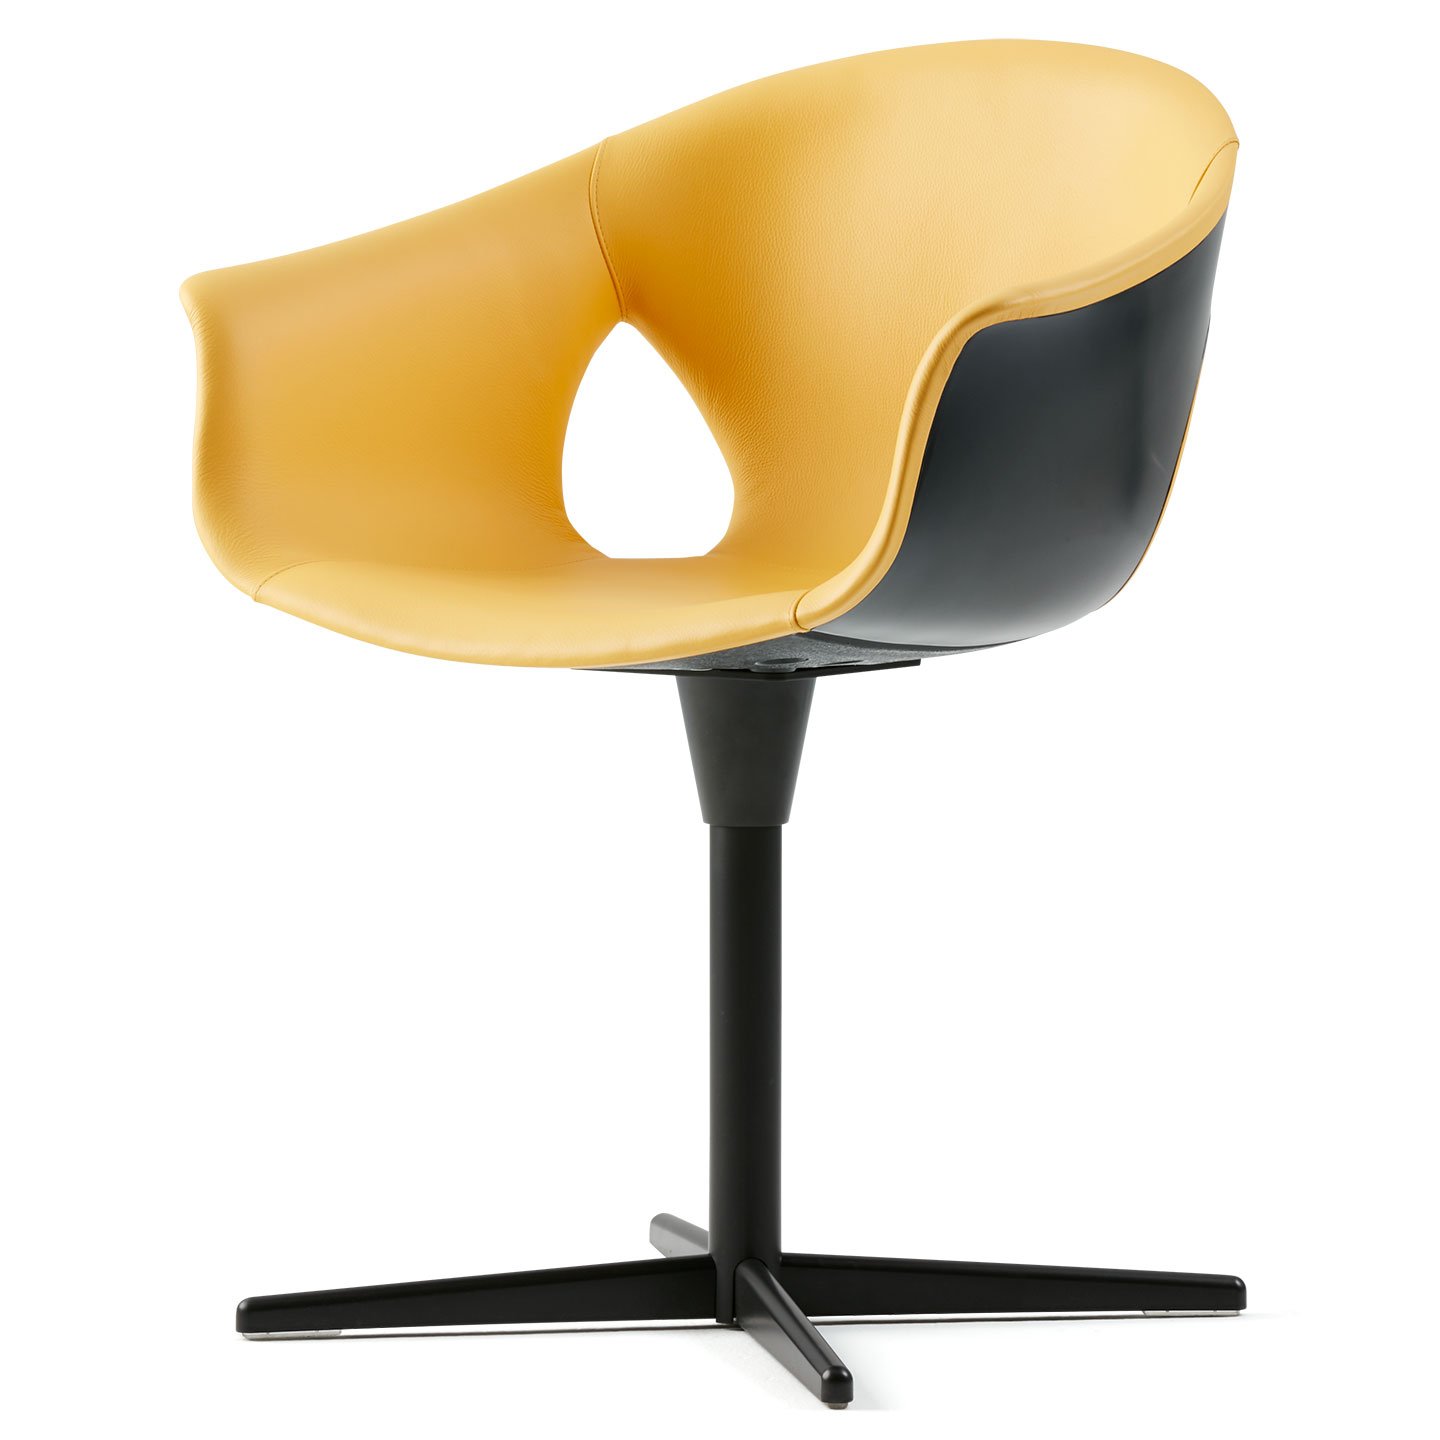 Haworth Ginger Ale chair in yellow leather upholstery and black exterior with vertical standing base in a side view